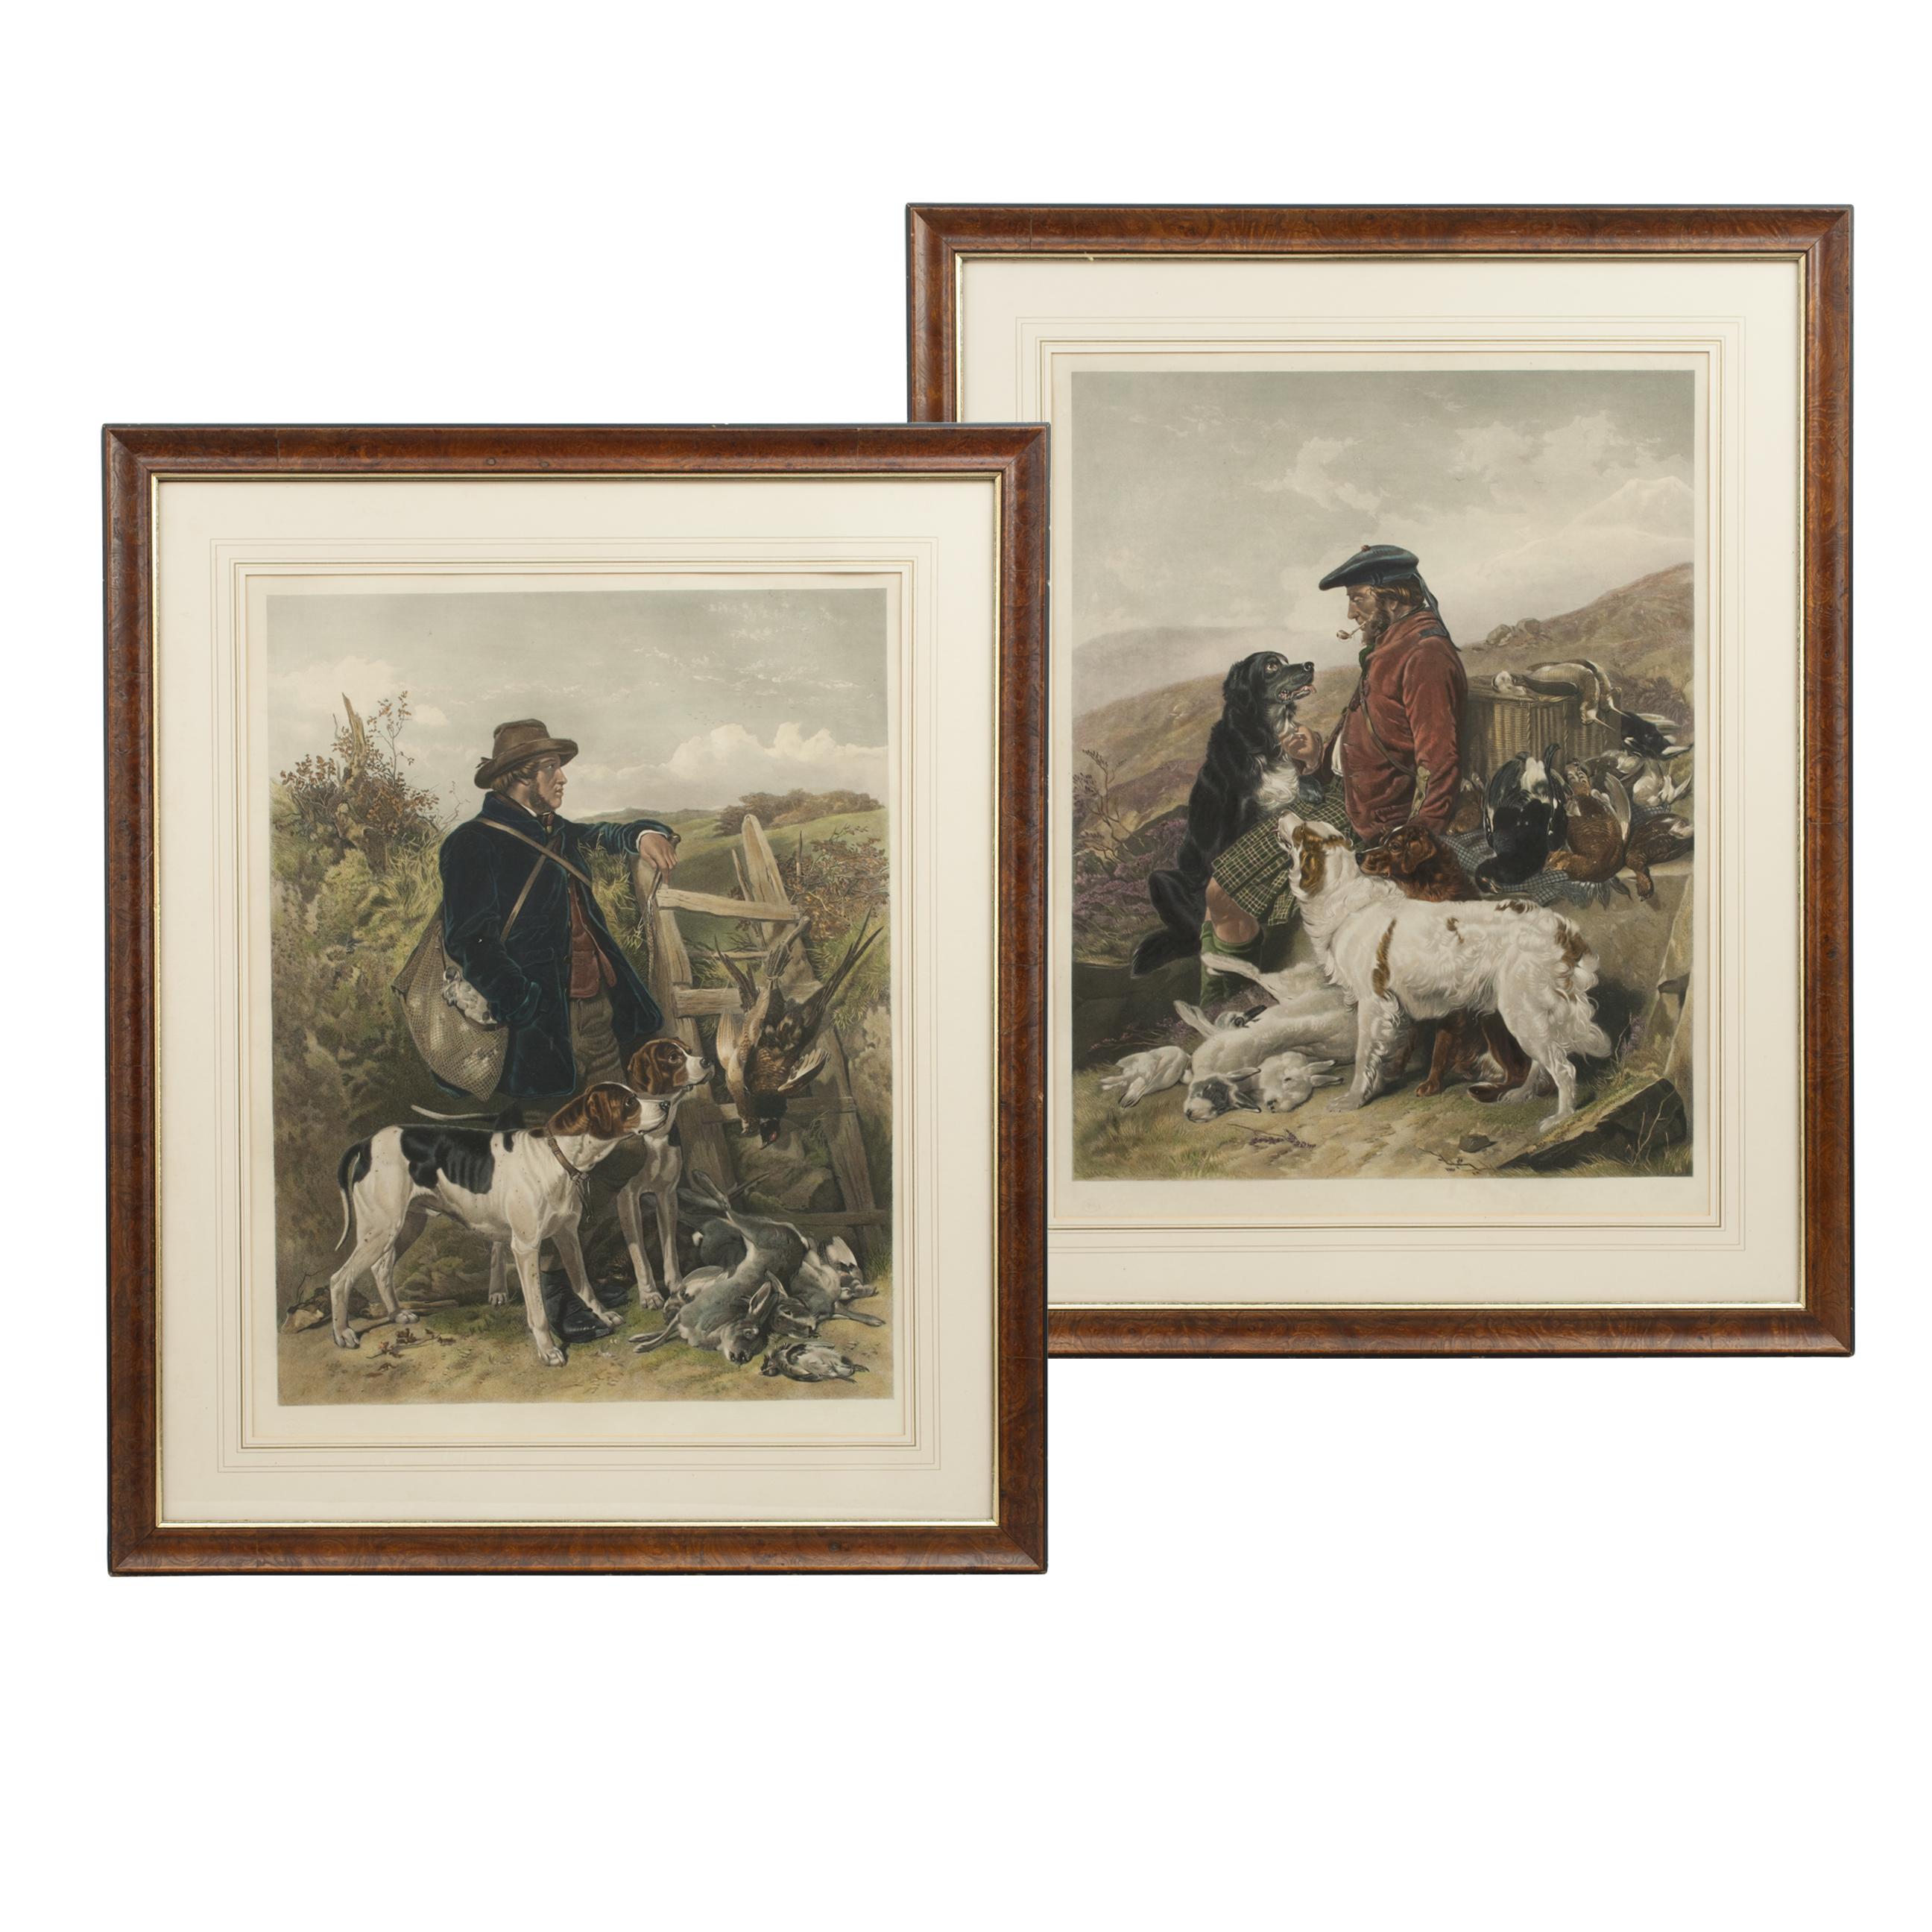 English and Scottish Gamekeepers by Andsell Richard, 19th Century Engraving